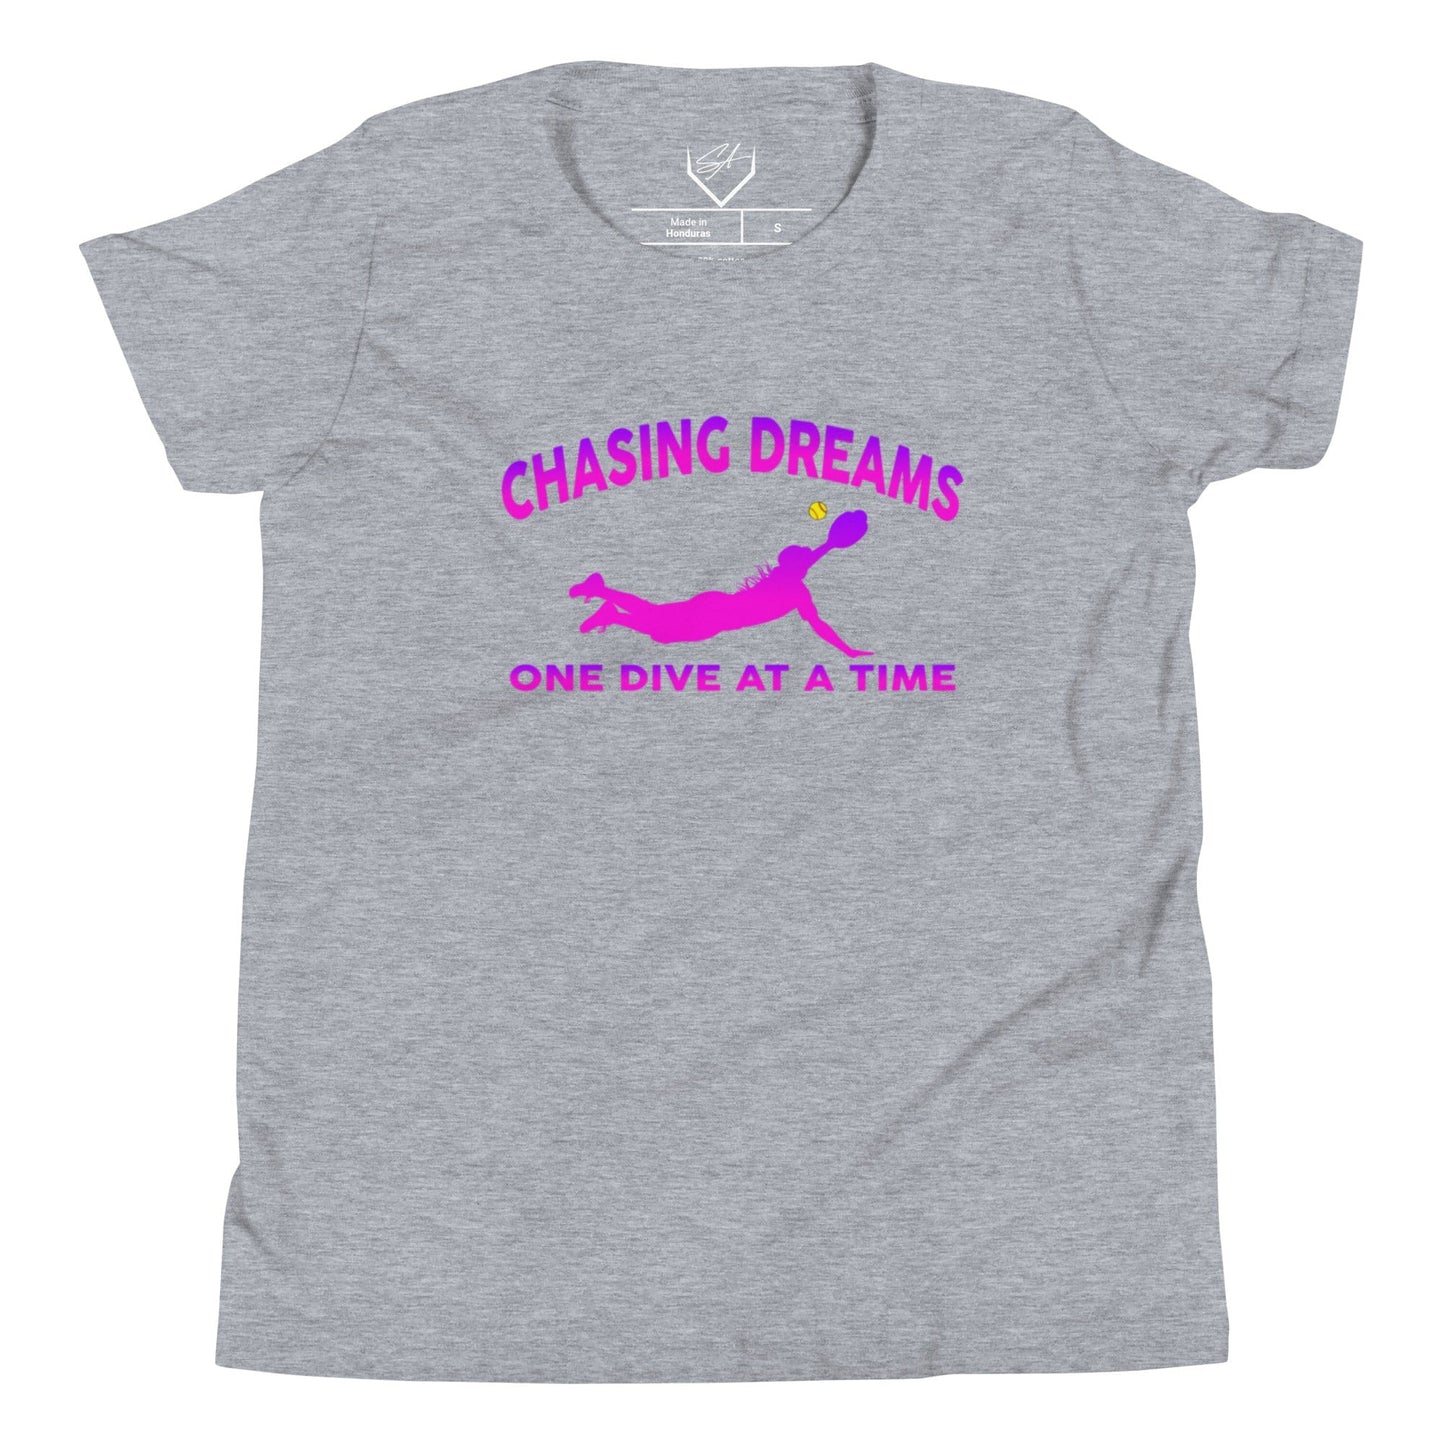 Chasing Dreams One Dive At A Time - Youth Tee